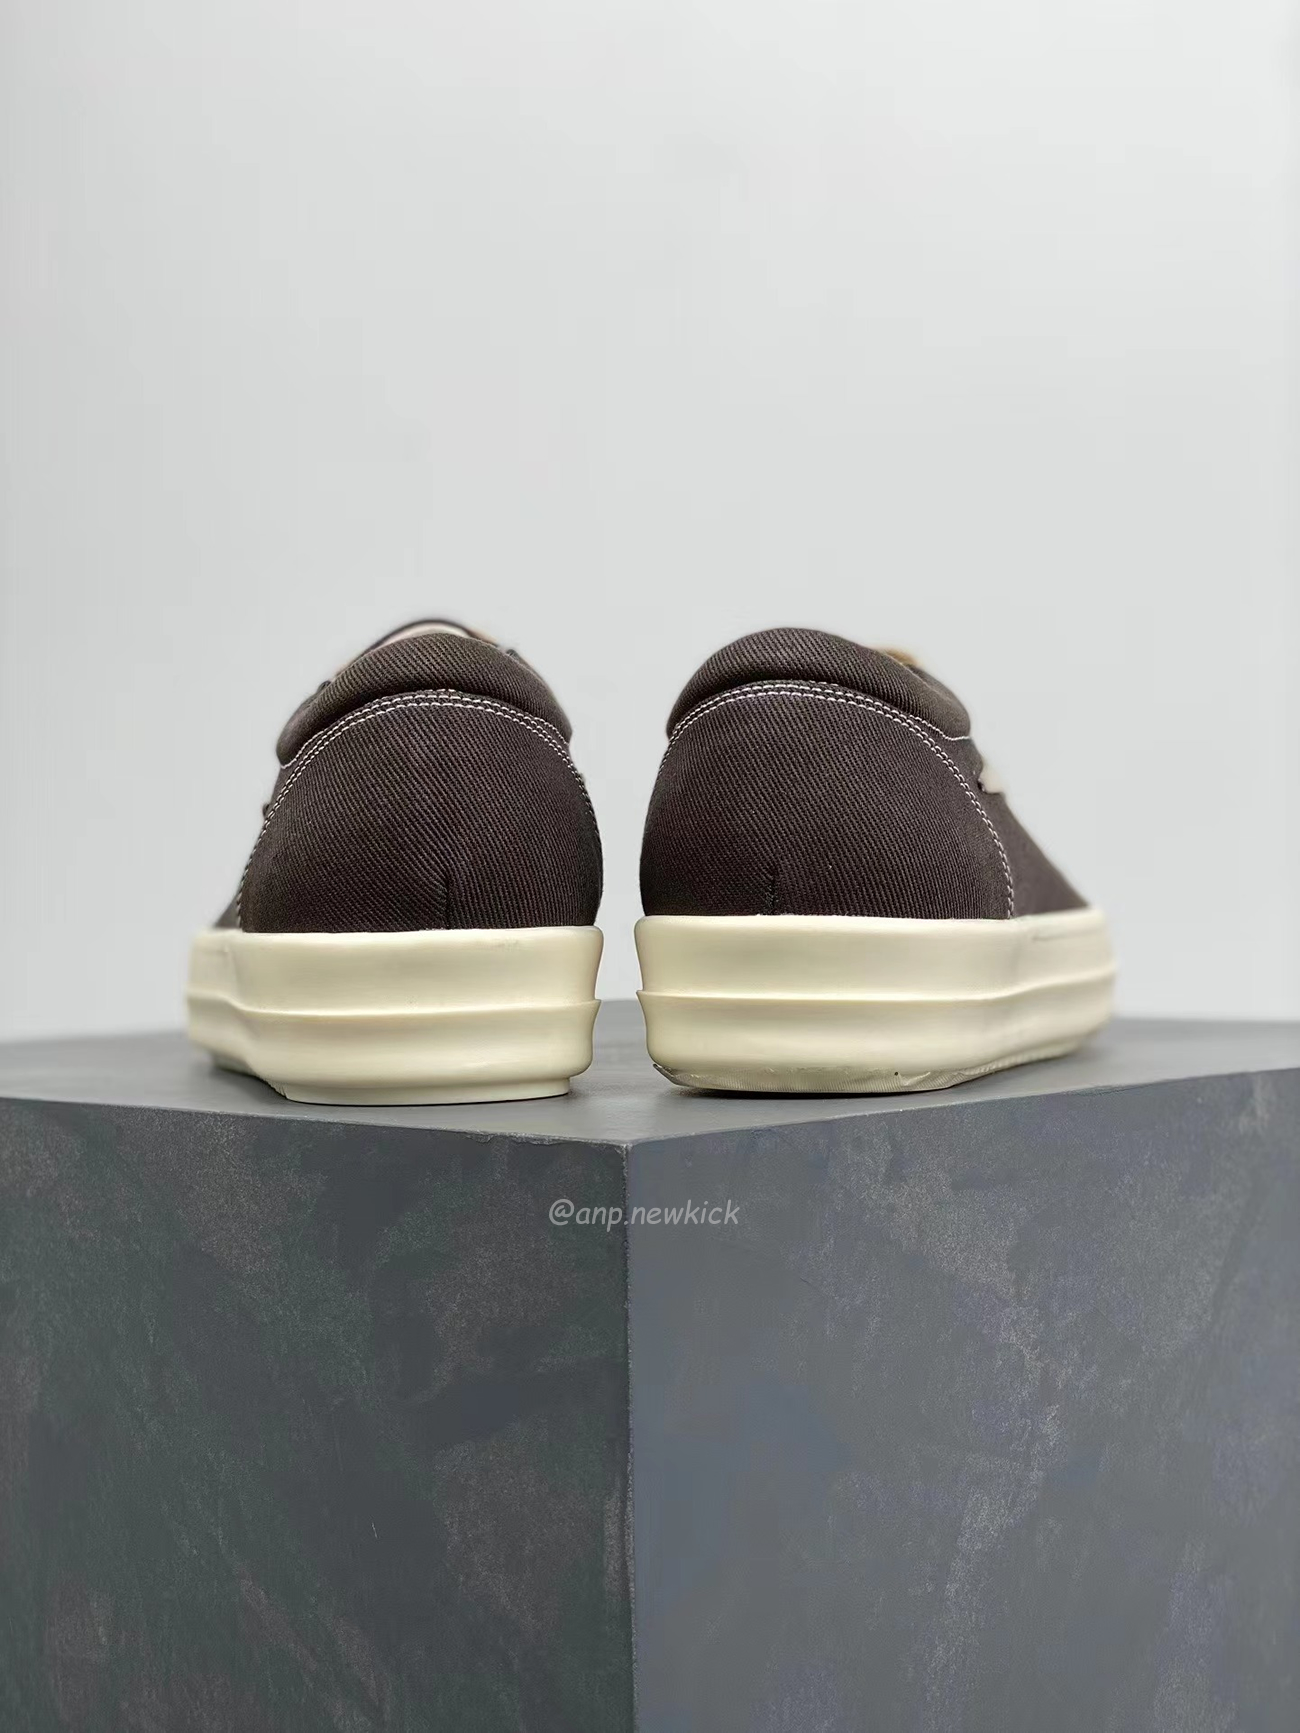 Rick Owens Leather Low Top Vintage Sneakers Suede Canvas Black Taupe Grey Faded Pnk Pearl Milk Dark Dust (23) - newkick.org